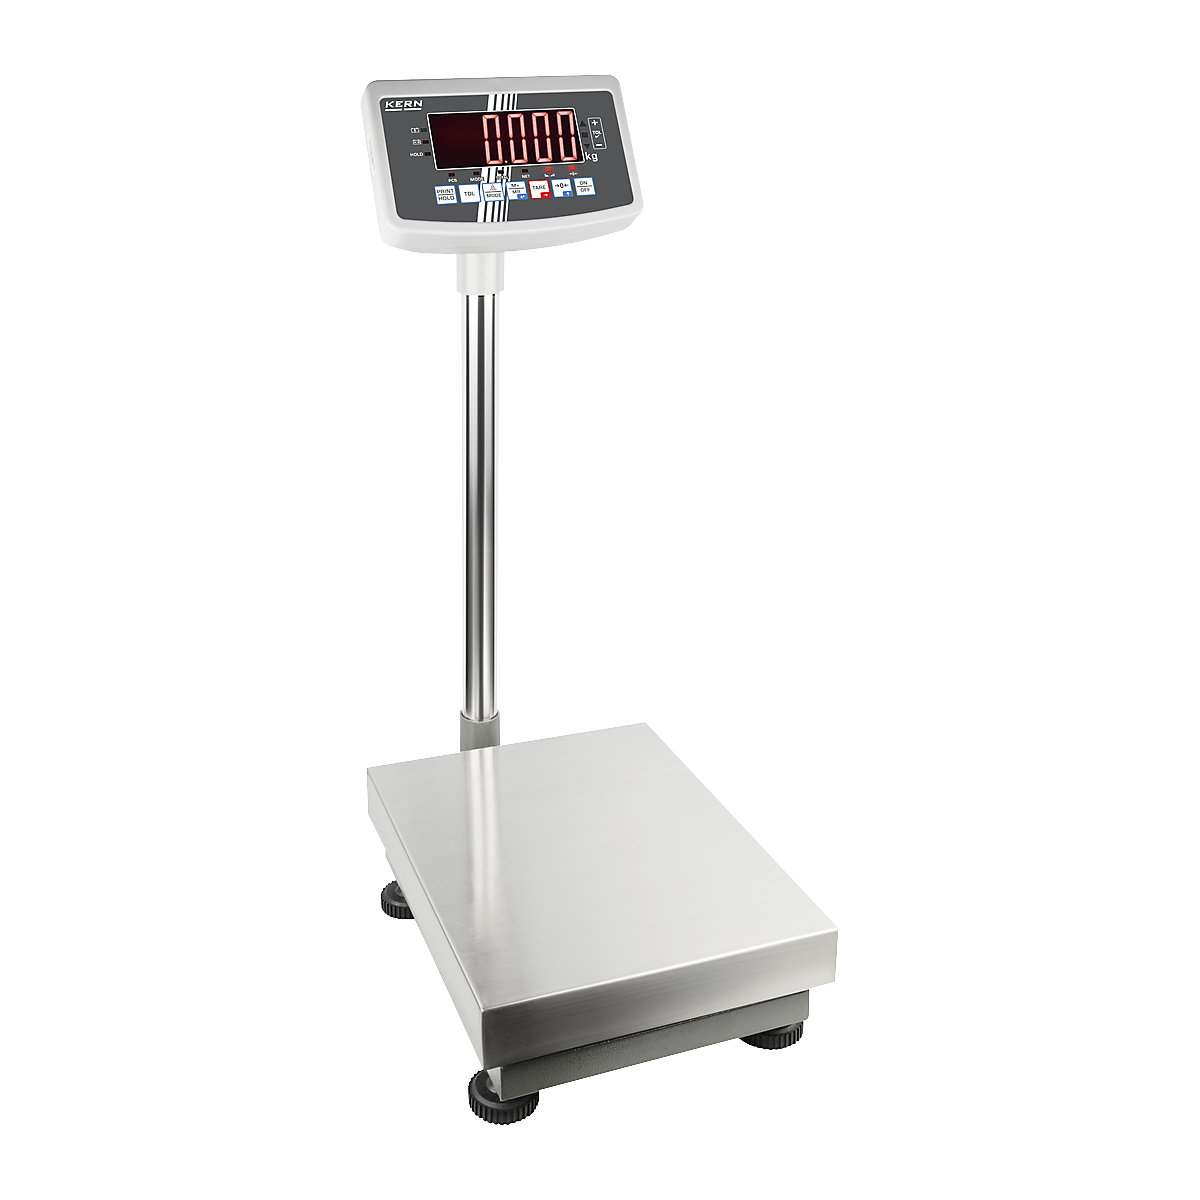 Platform scales – KERN, incl. tripod, weighing range up to 30 kg, read-out accuracy 2 g-3